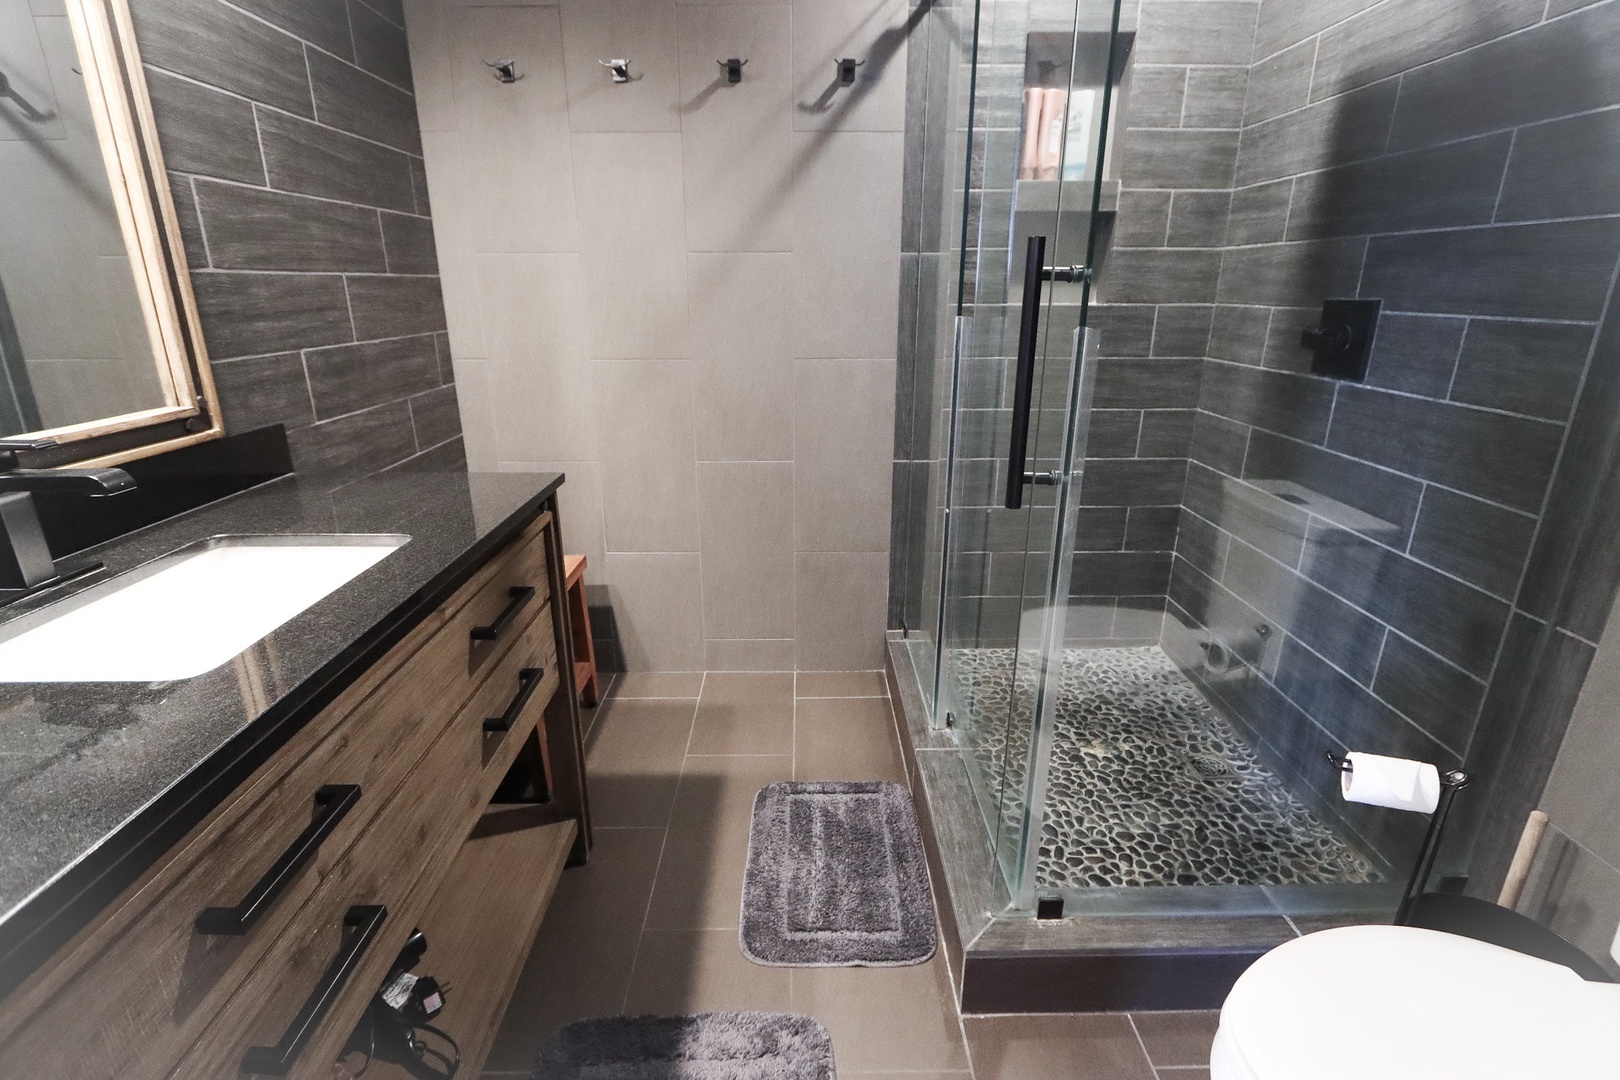 Ensuite bathroom with stand-up shower